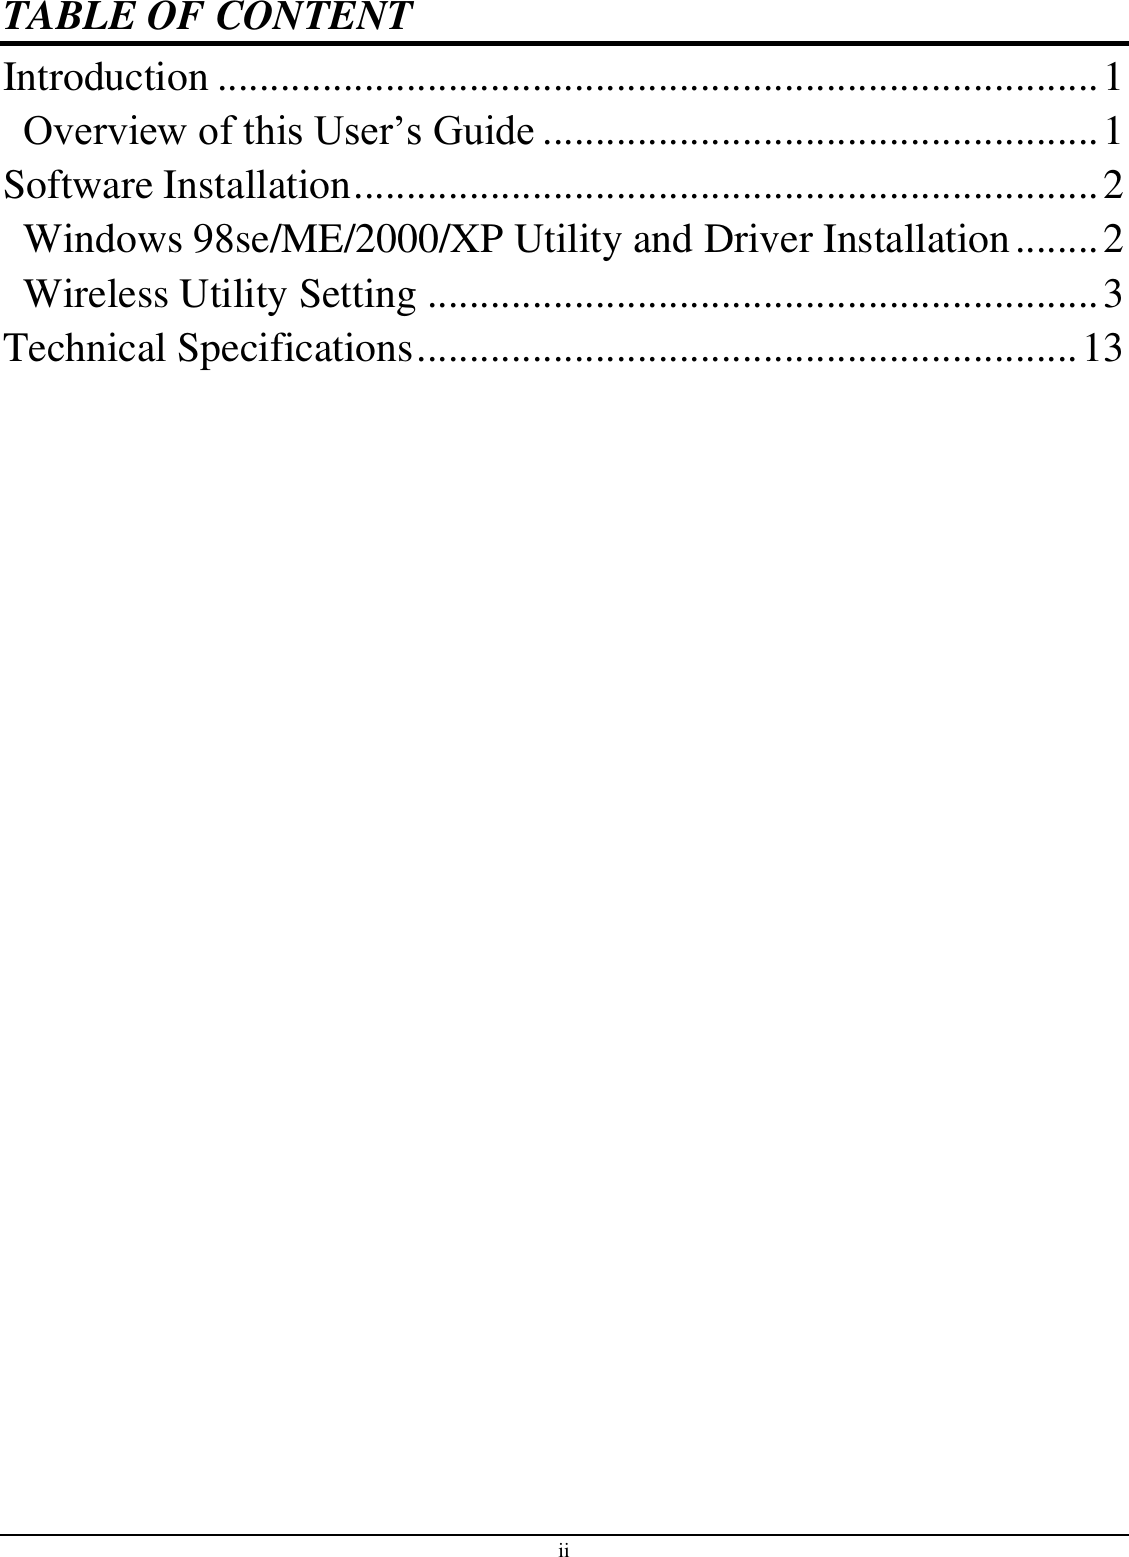 ii TABLE OF CONTENT Introduction .................................................................................... 1 Overview of this User’s Guide ..................................................... 1 Software Installation ....................................................................... 2 Windows 98se/ME/2000/XP Utility and Driver Installation ........ 2 Wireless Utility Setting ................................................................ 3 Technical Specifications ............................................................... 13  